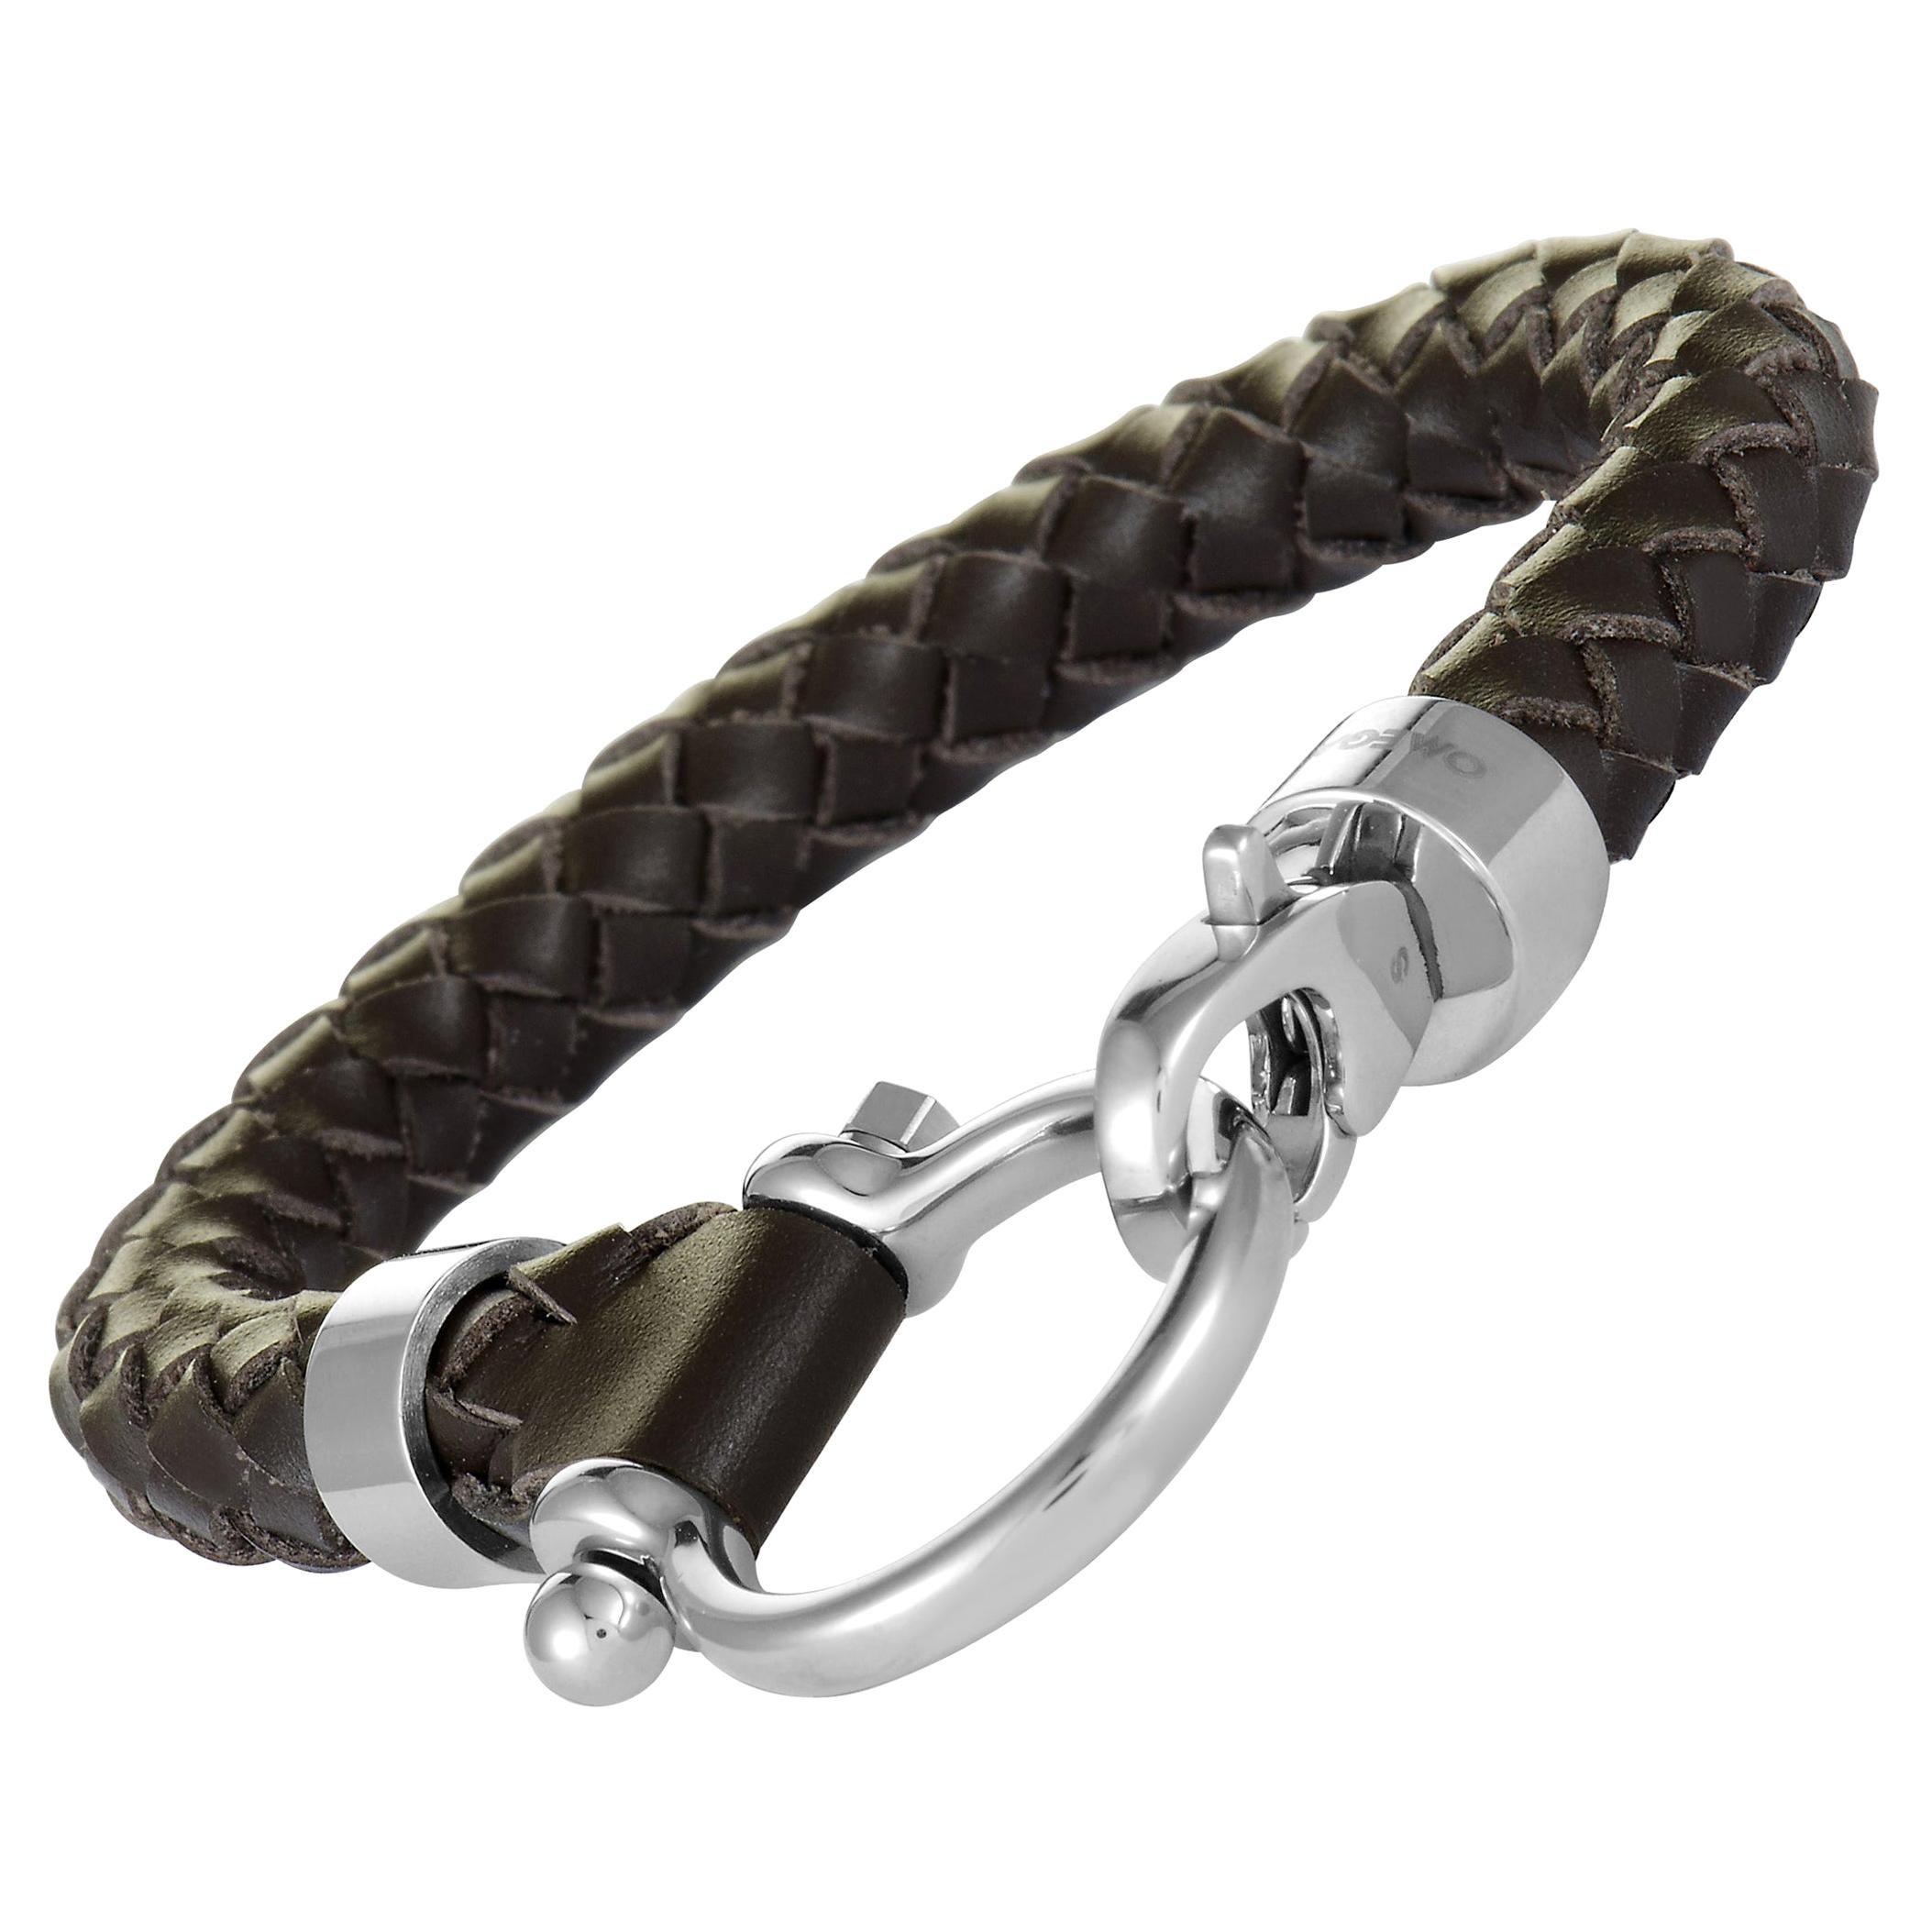 Omega Aqua Sailing Stainless Steel and Brown Leather Bracelet at